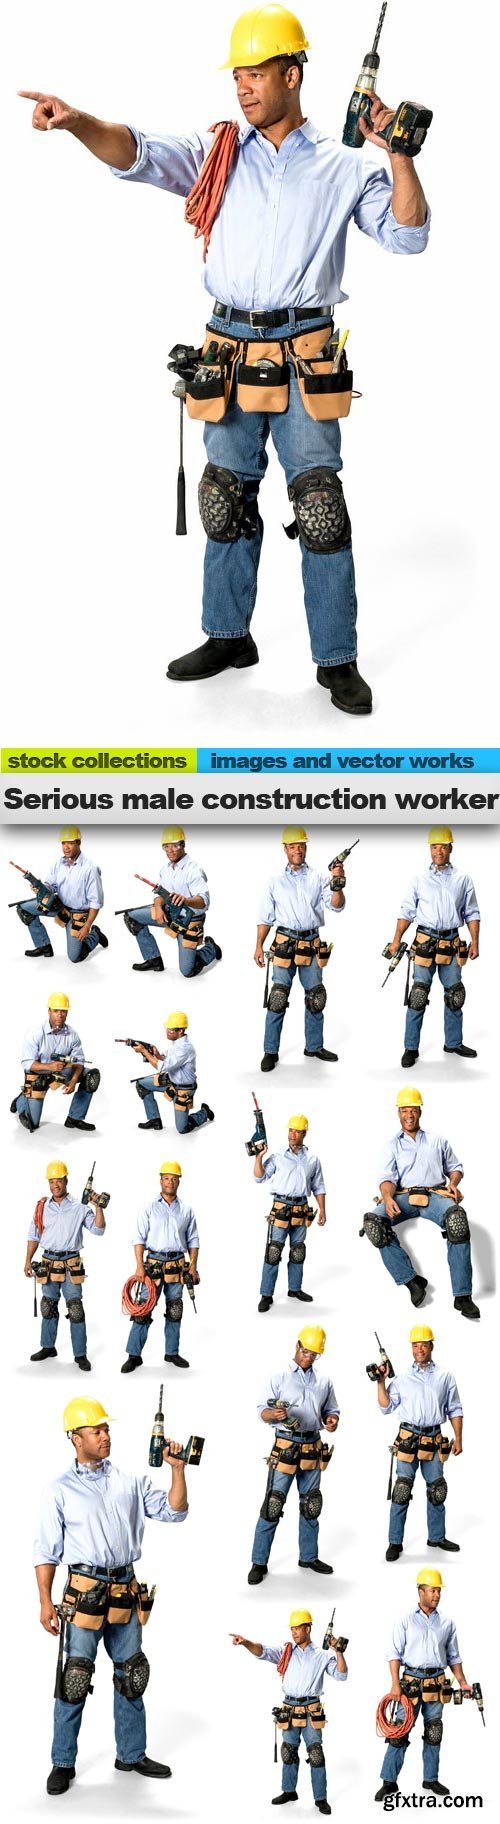 Serious male construction worker, 15 x UHQ JPEG